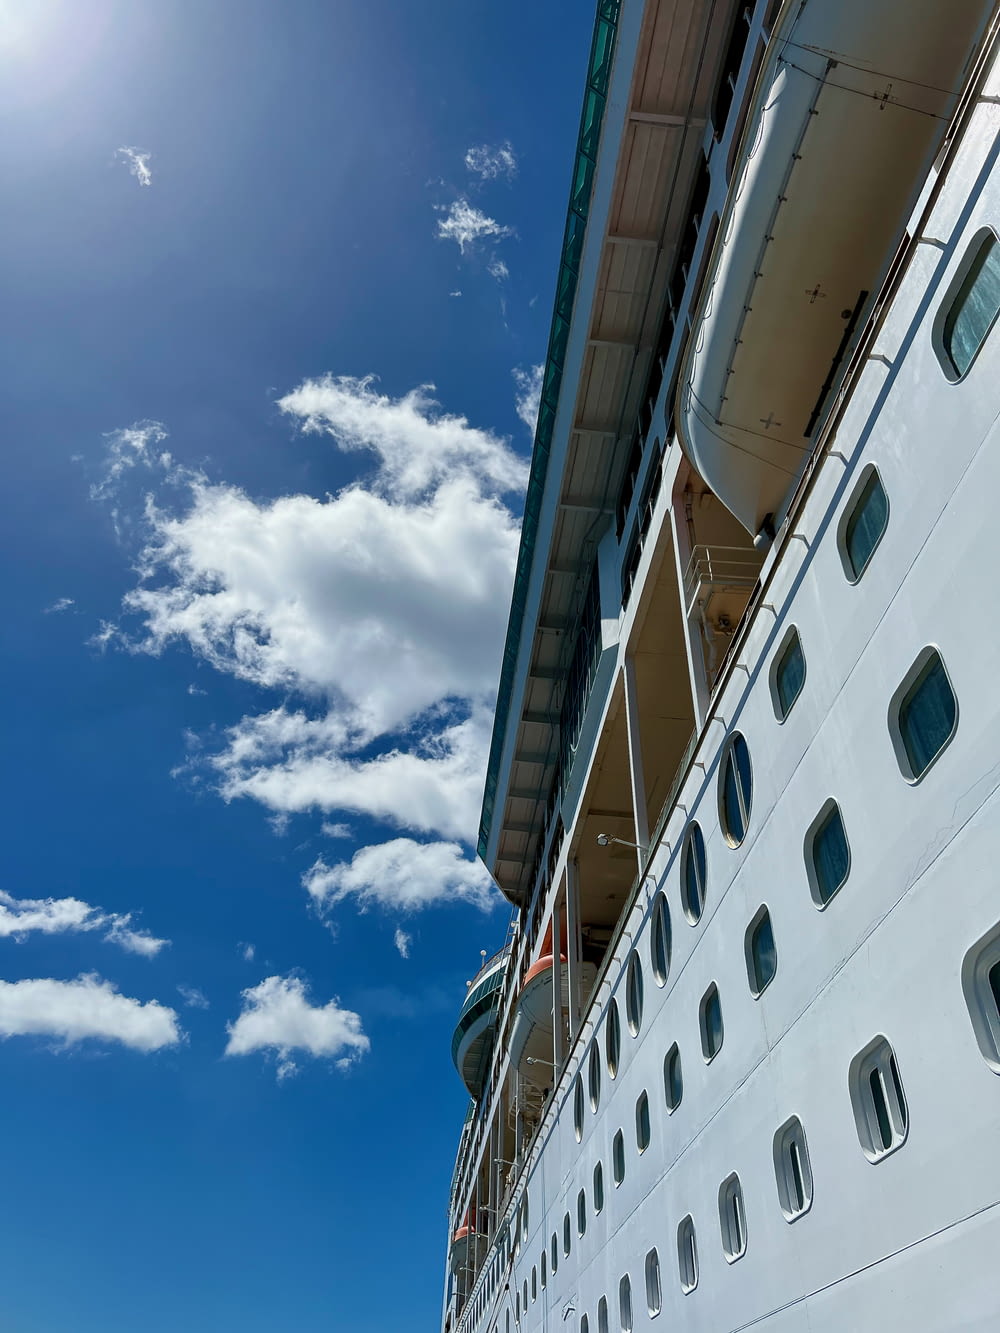 a large cruise ship under a partly cloudy blue sky